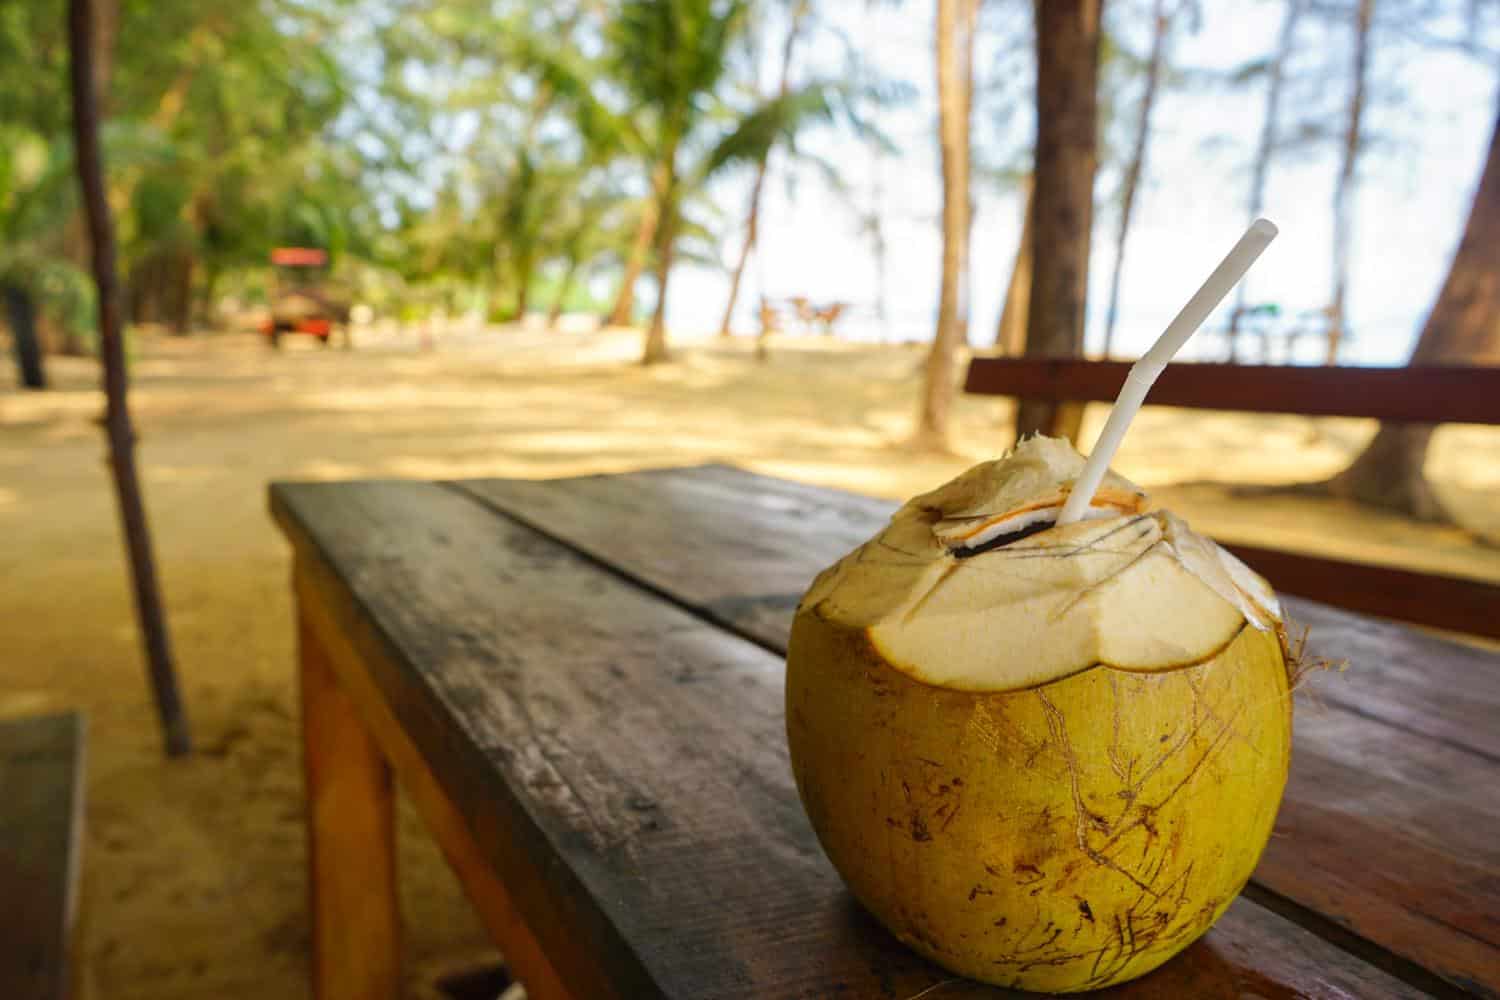 Coconut on a wooden table